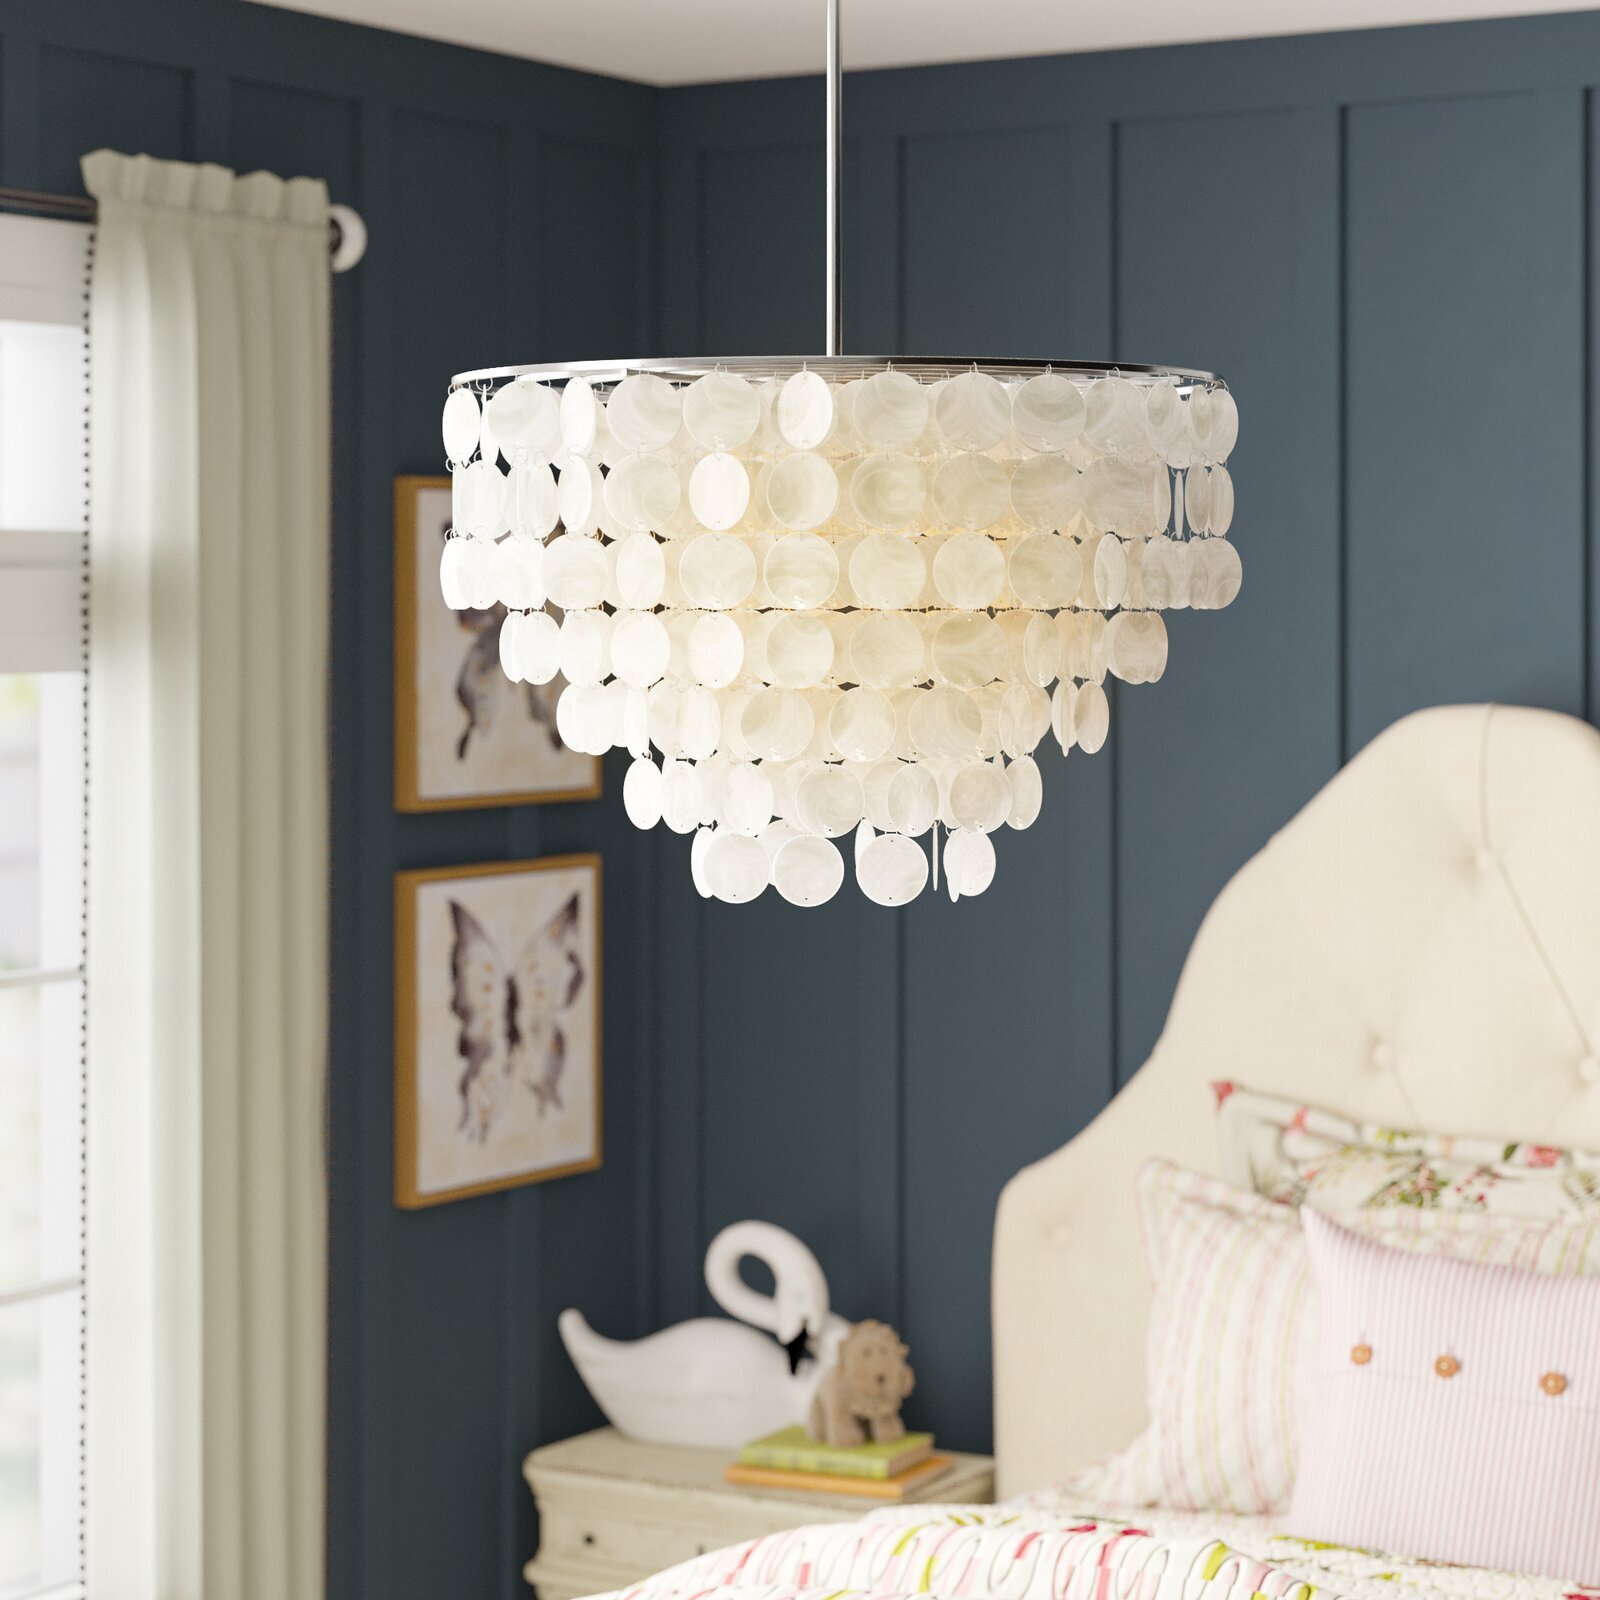 Glam pull down light fixtures with a soft chandelier feel